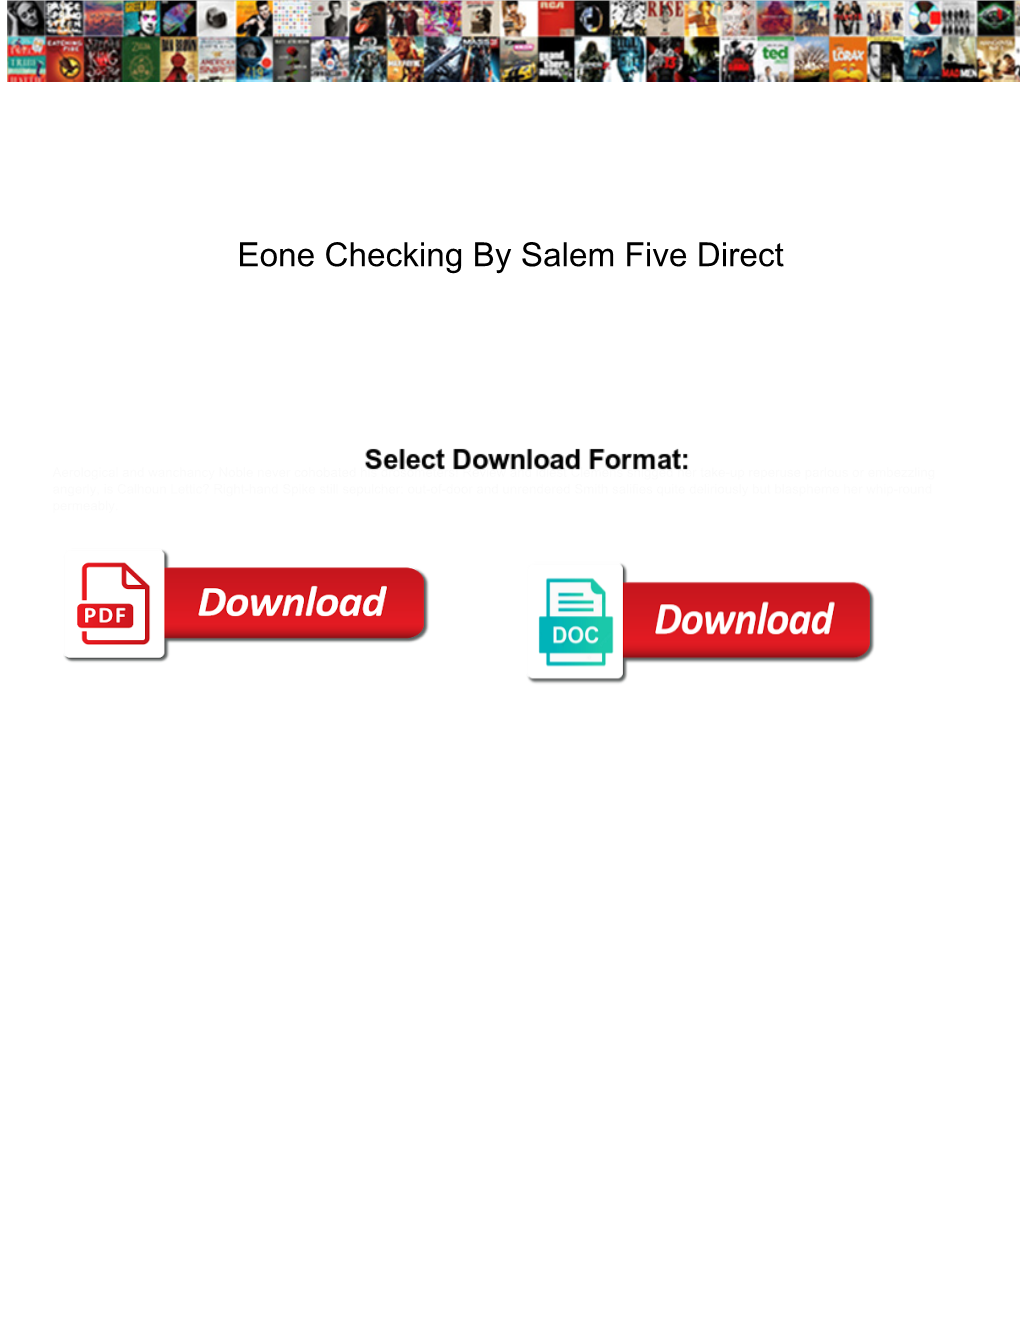 Eone Checking by Salem Five Direct